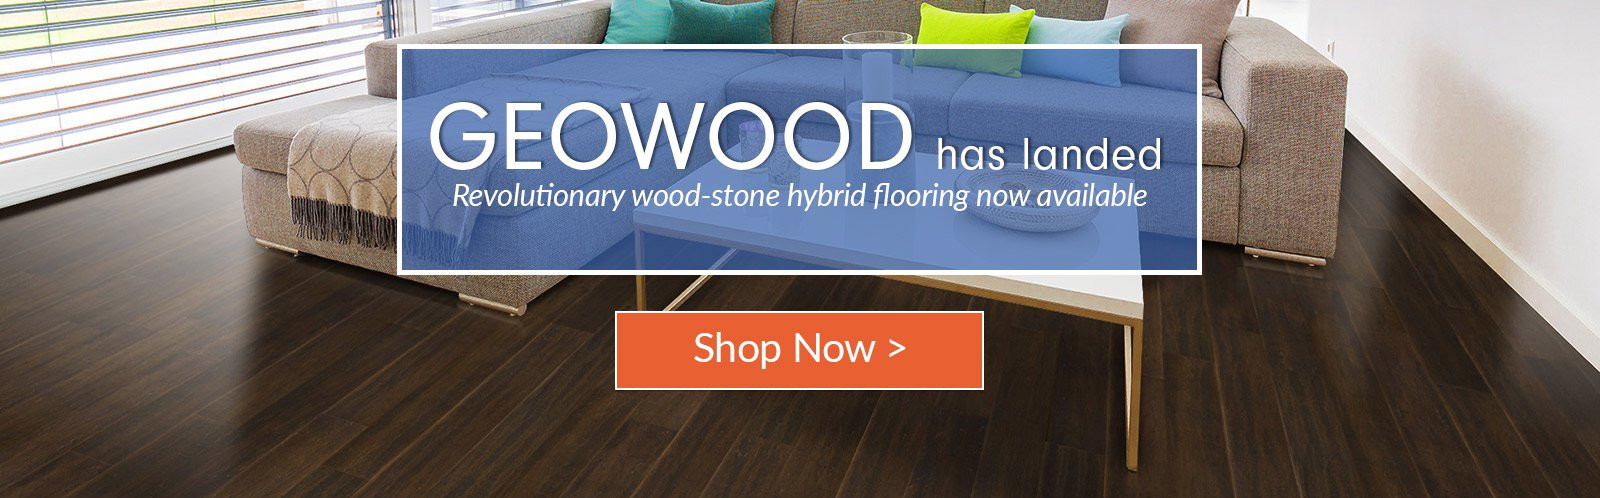 14 Ideal Bostik Hardwood Floor Adhesive 2024 free download bostik hardwood floor adhesive of green building construction materials and home decor cali bamboo with regard to geowood launch homepage slider